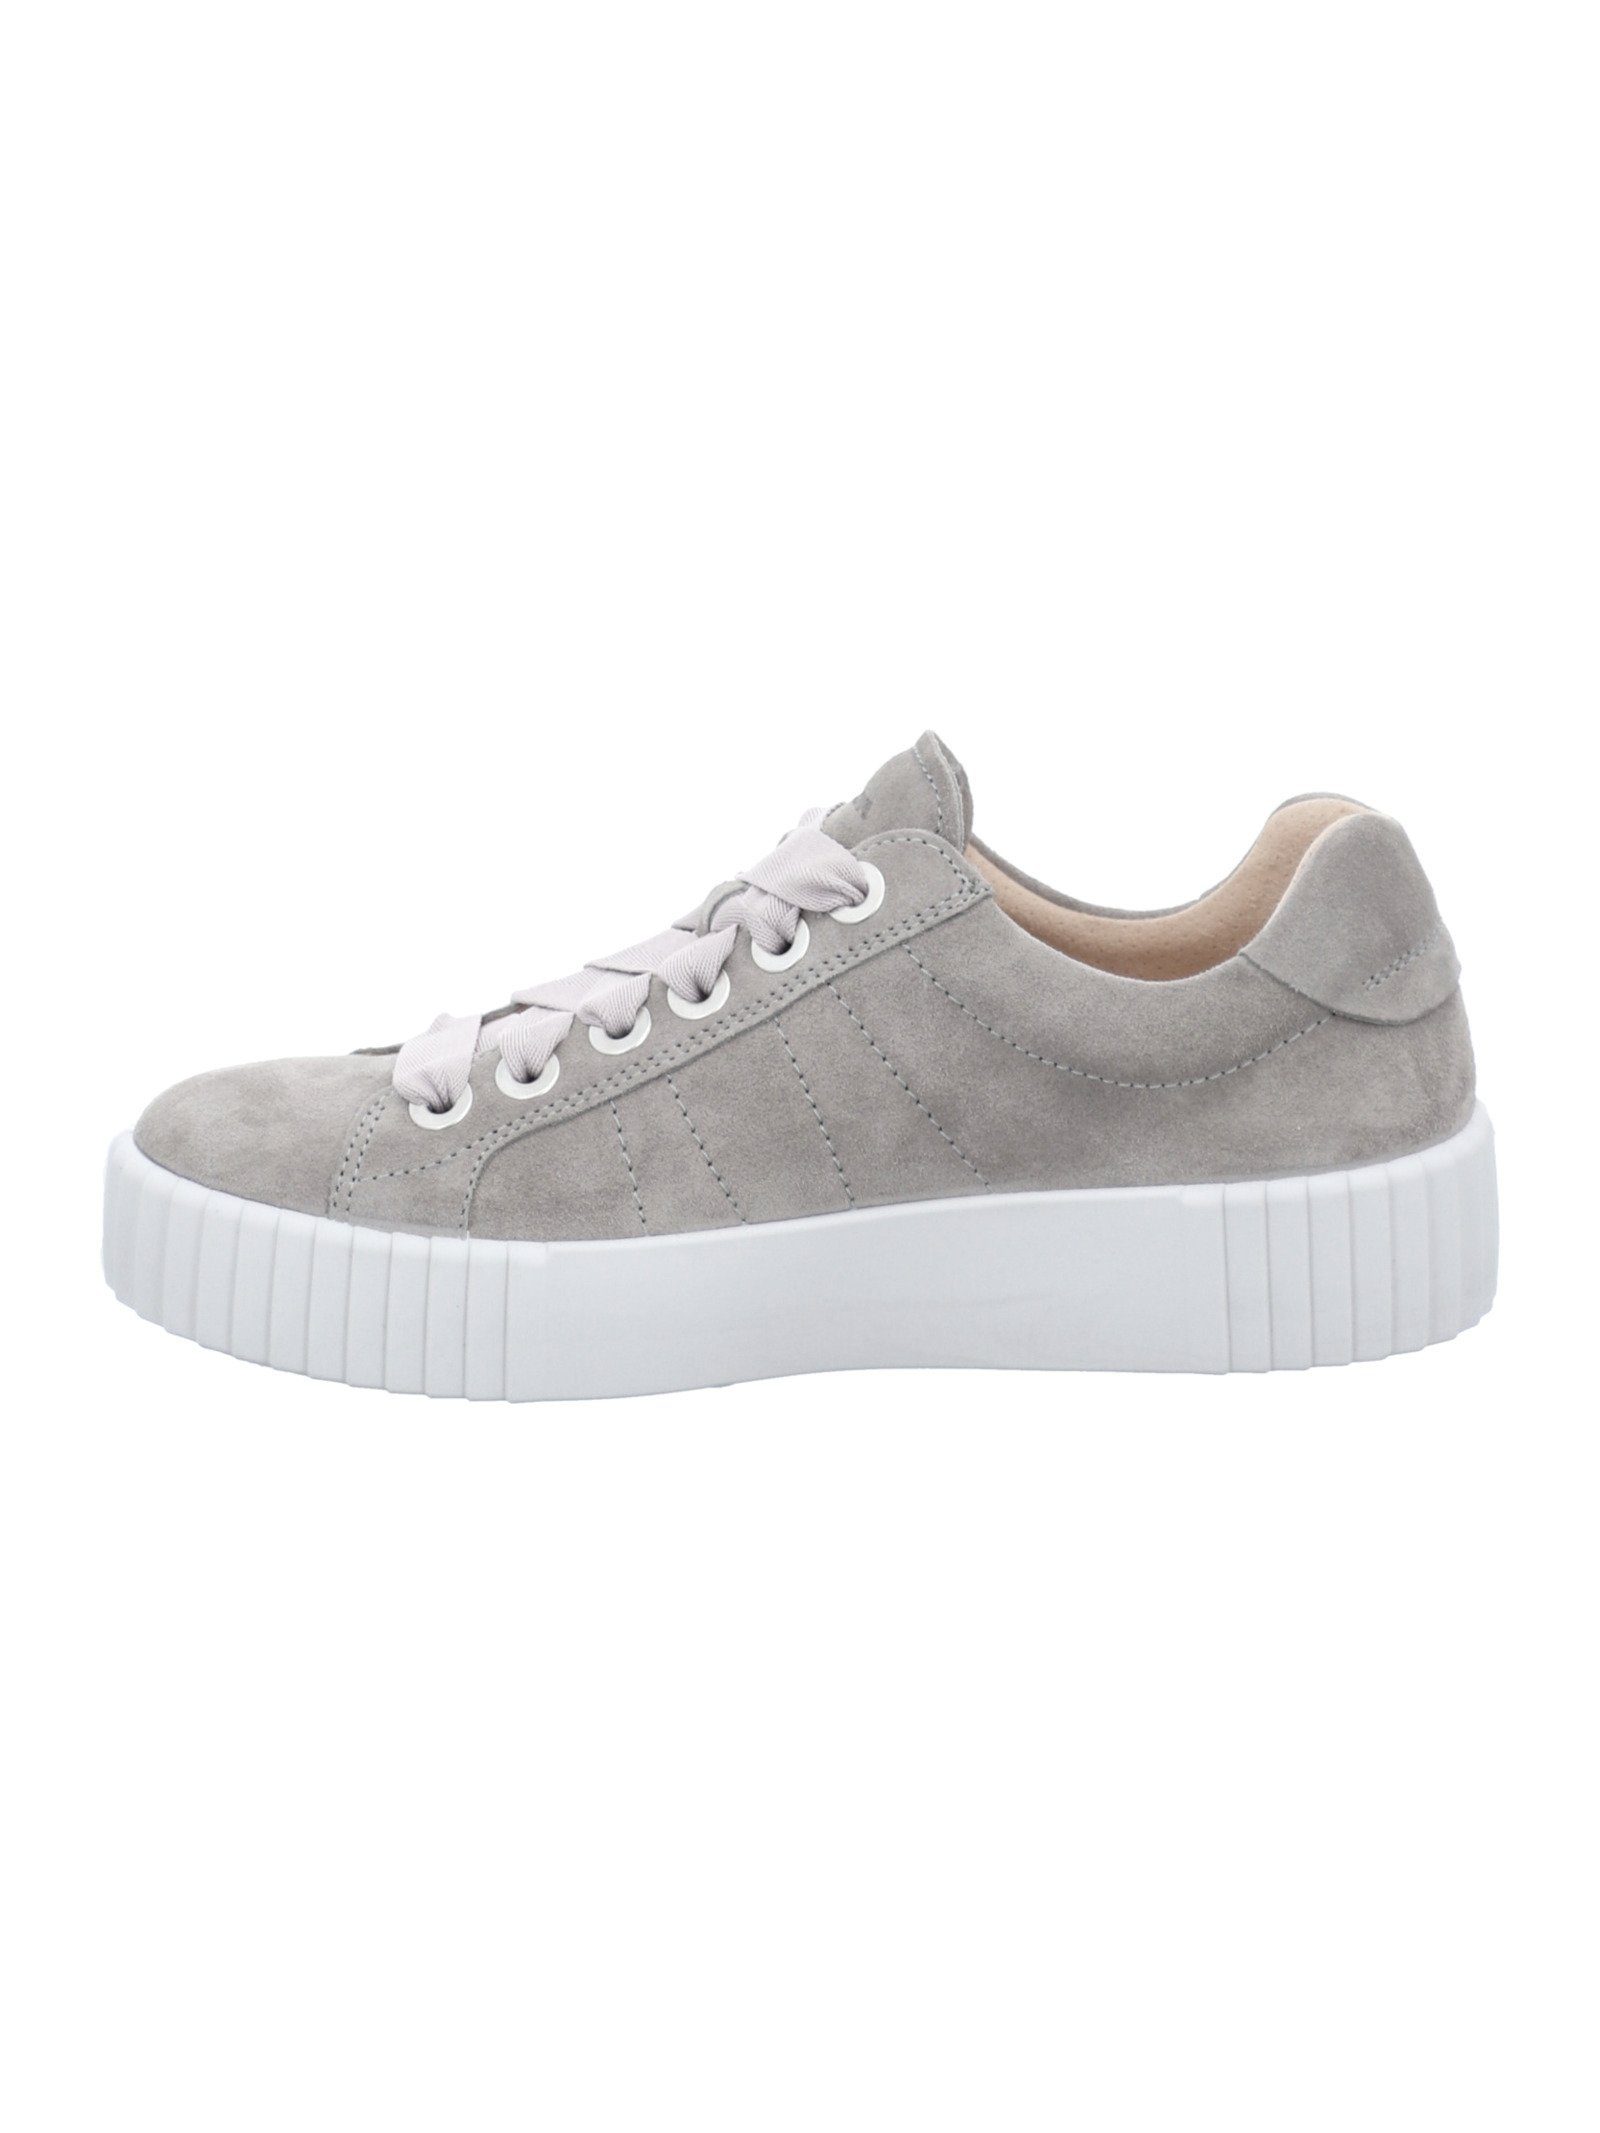 Westland Sneaker Taupe